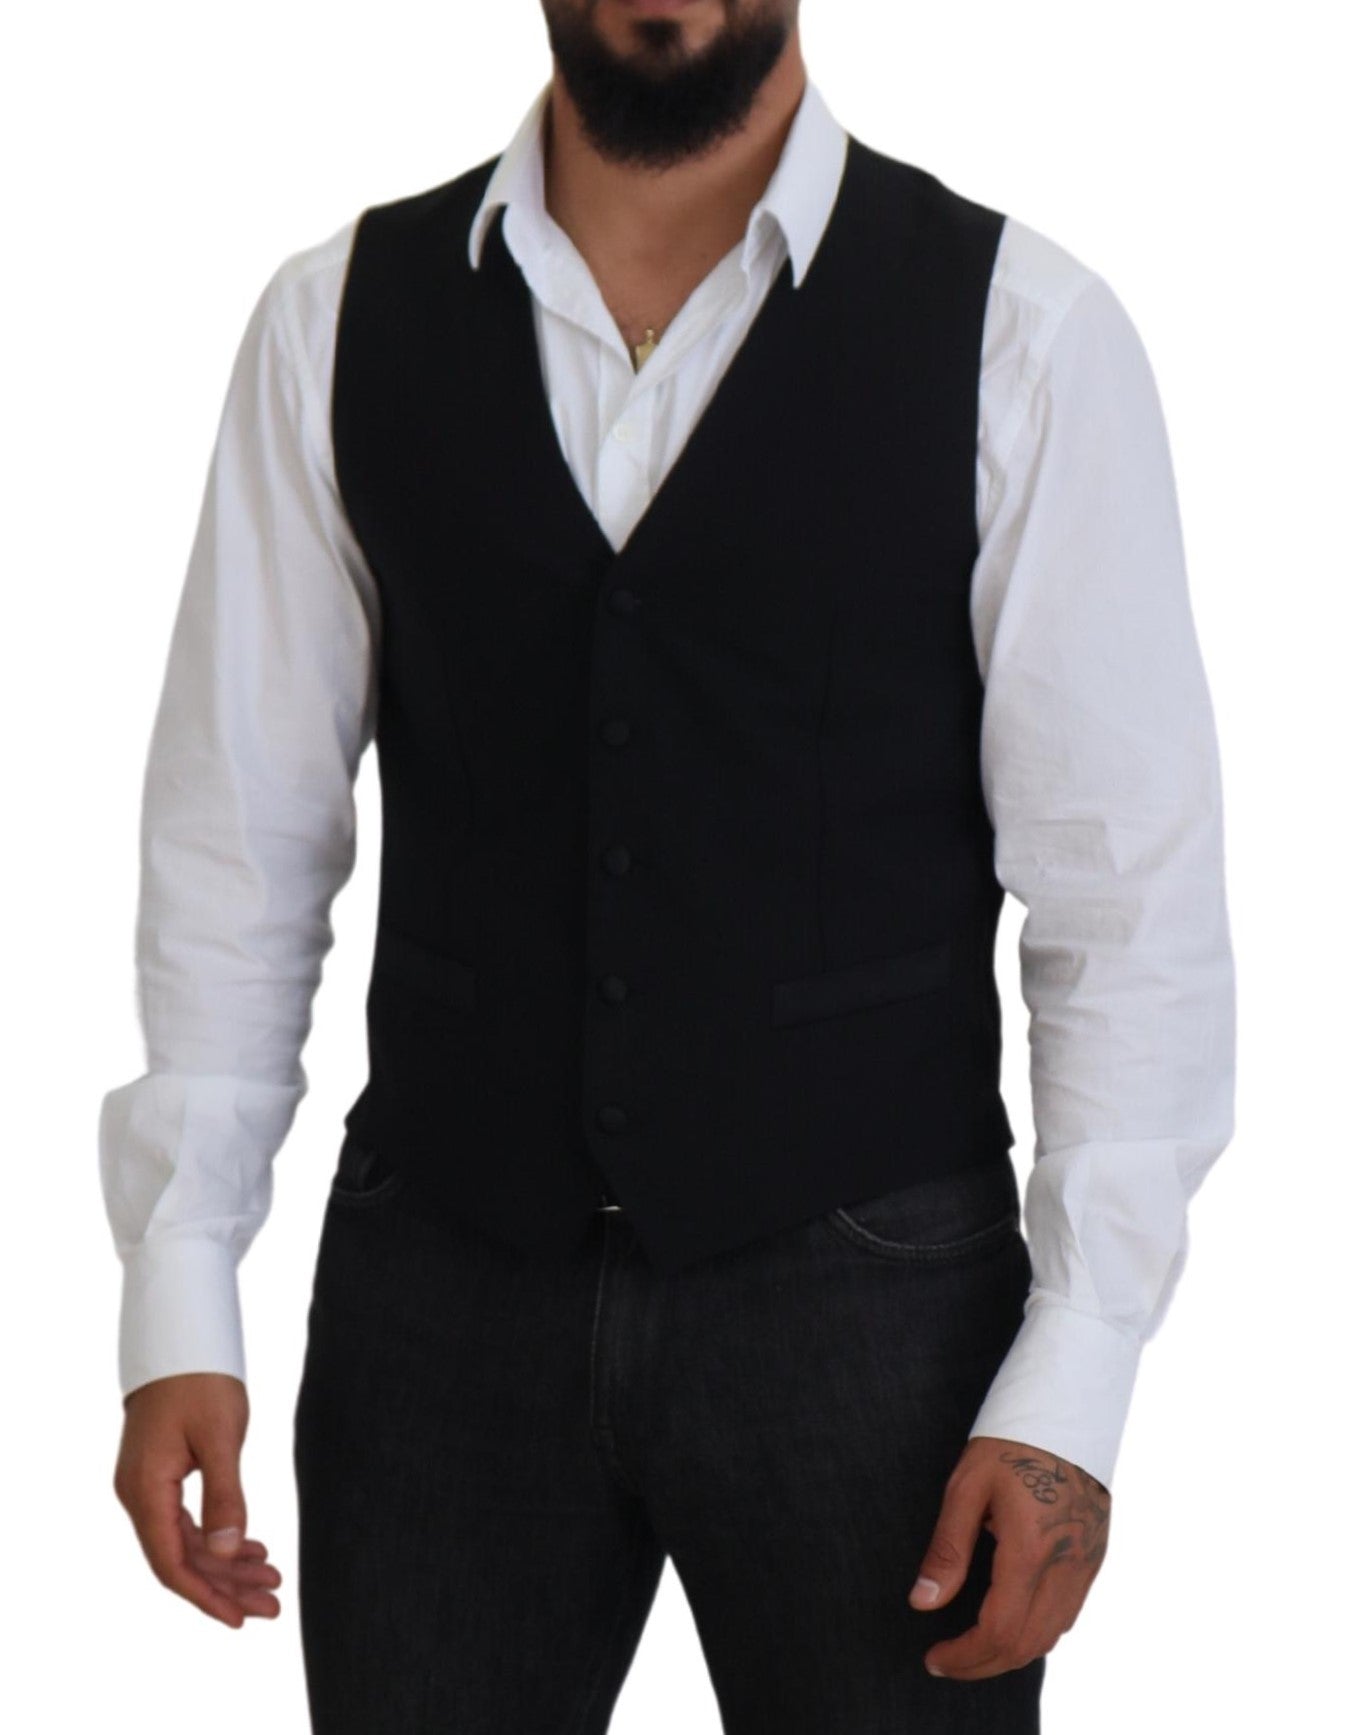 Black Virgin Wool Waistcoat Formal Vest - Designed by Dolce & Gabbana Available to Buy at a Discounted Price on Moon Behind The Hill Online Designer Discount Store